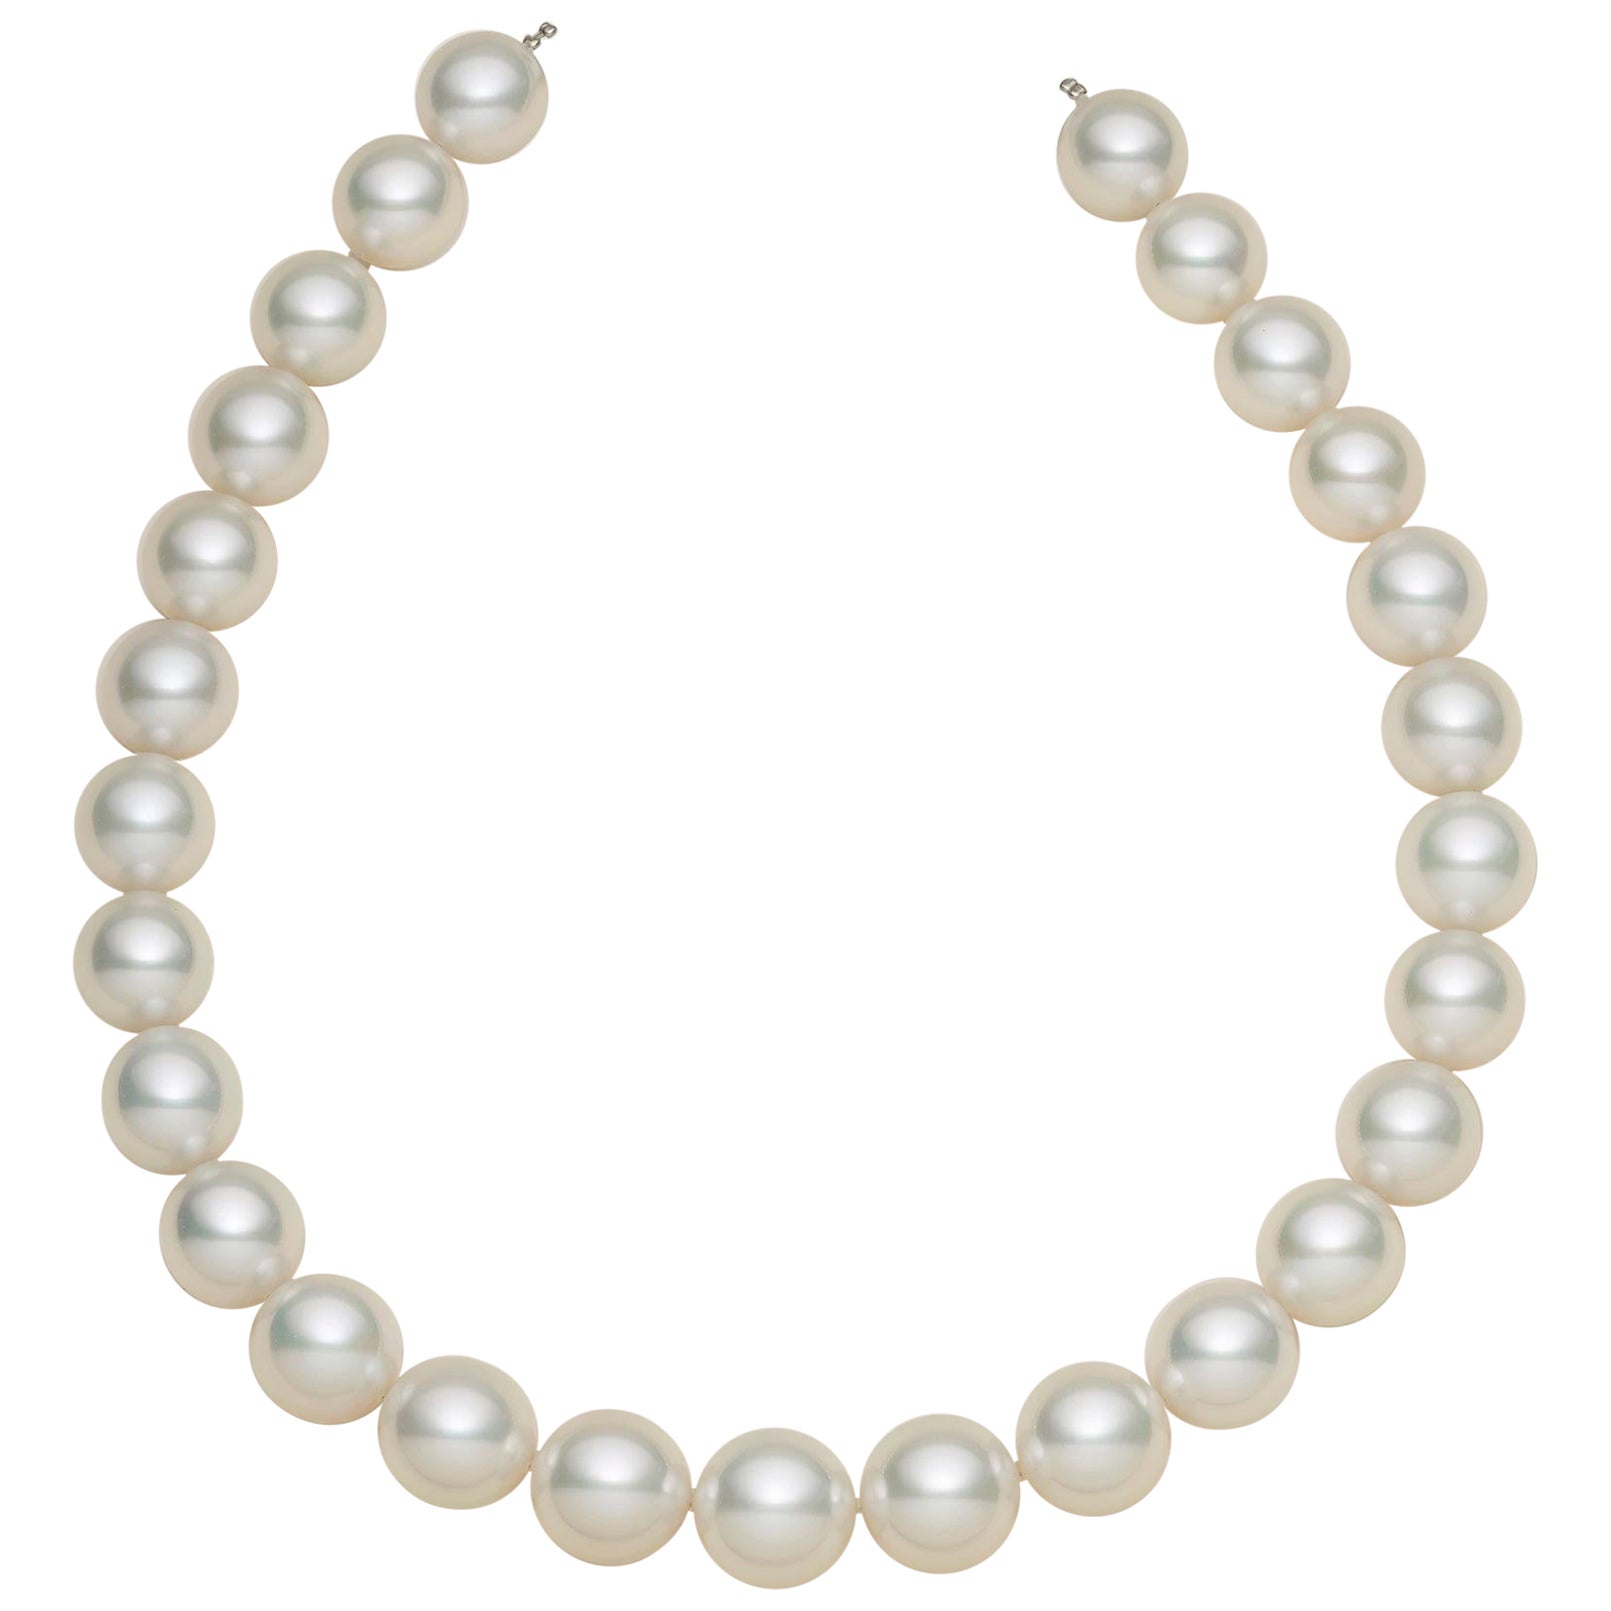 Eostre Nearly Round Australian South Sea Pearls Strand